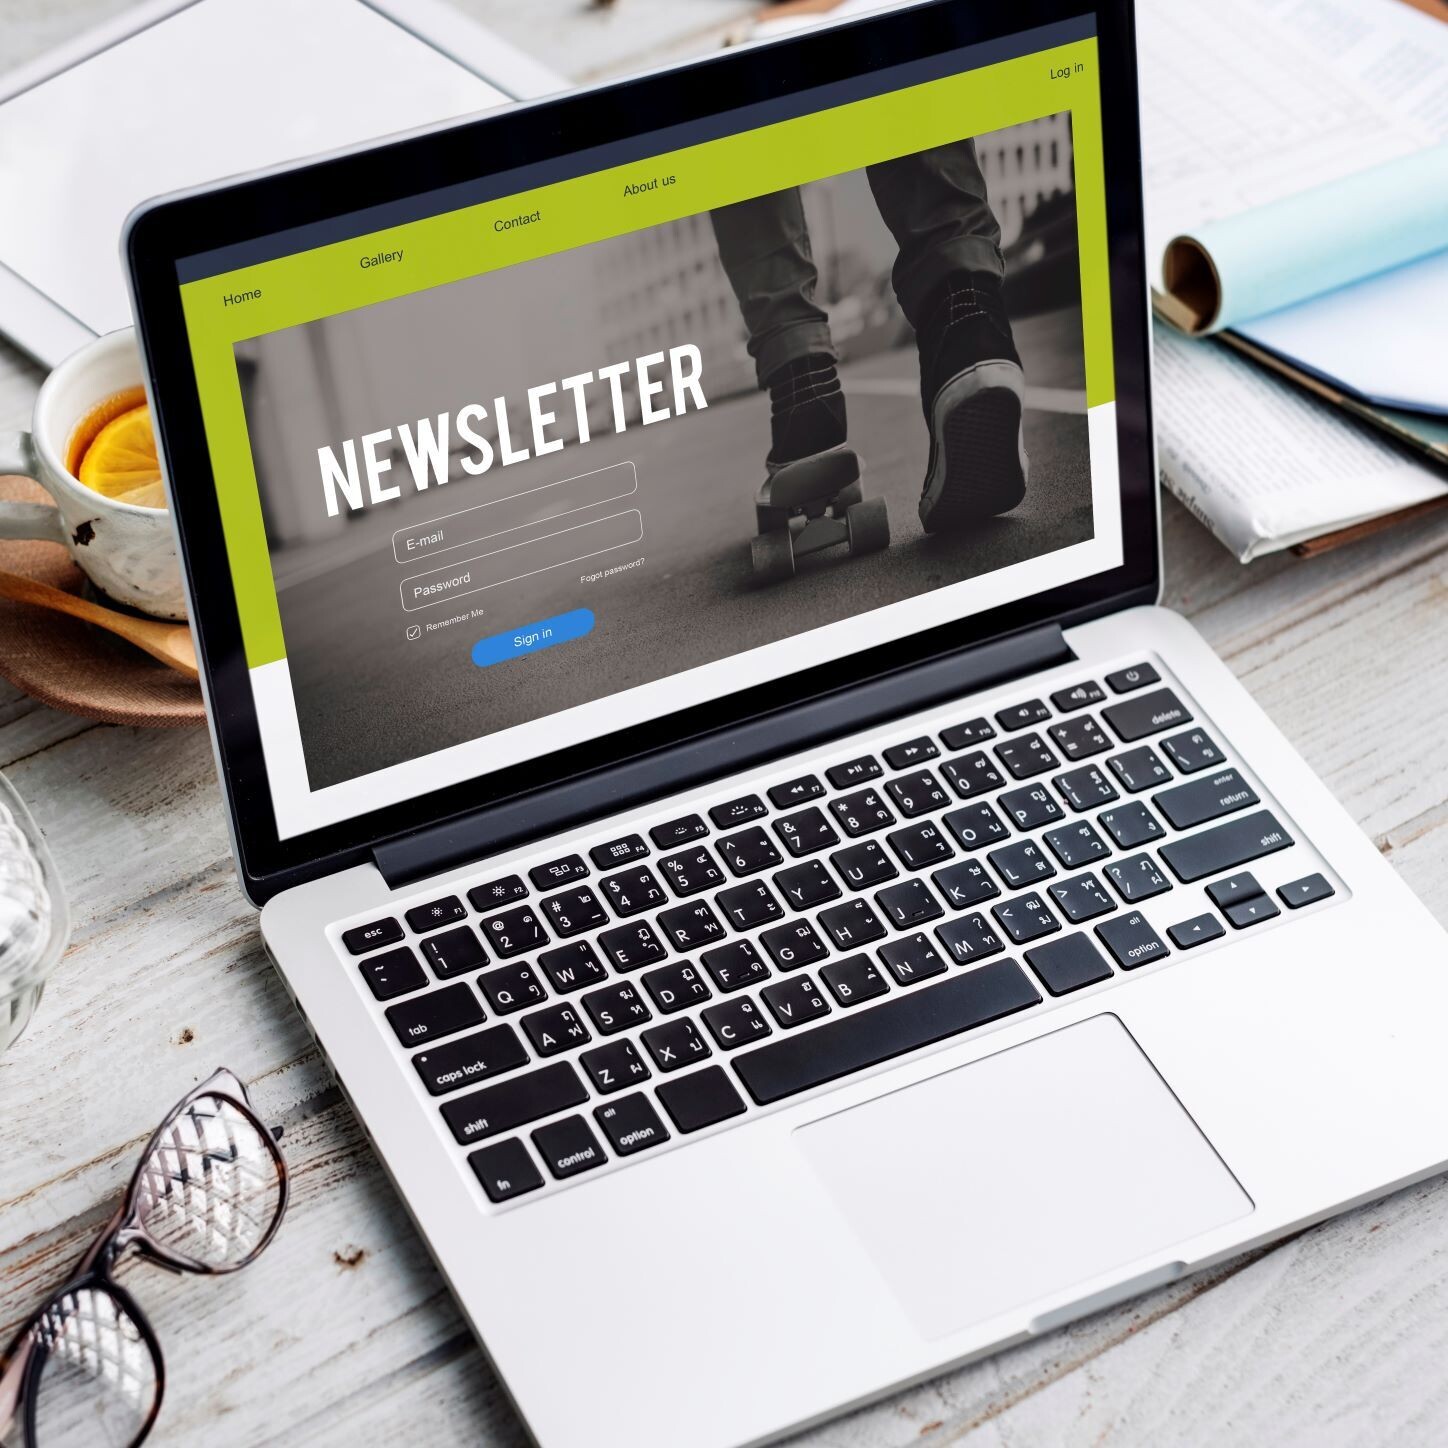 4 Tips to make your newsletters more engaging